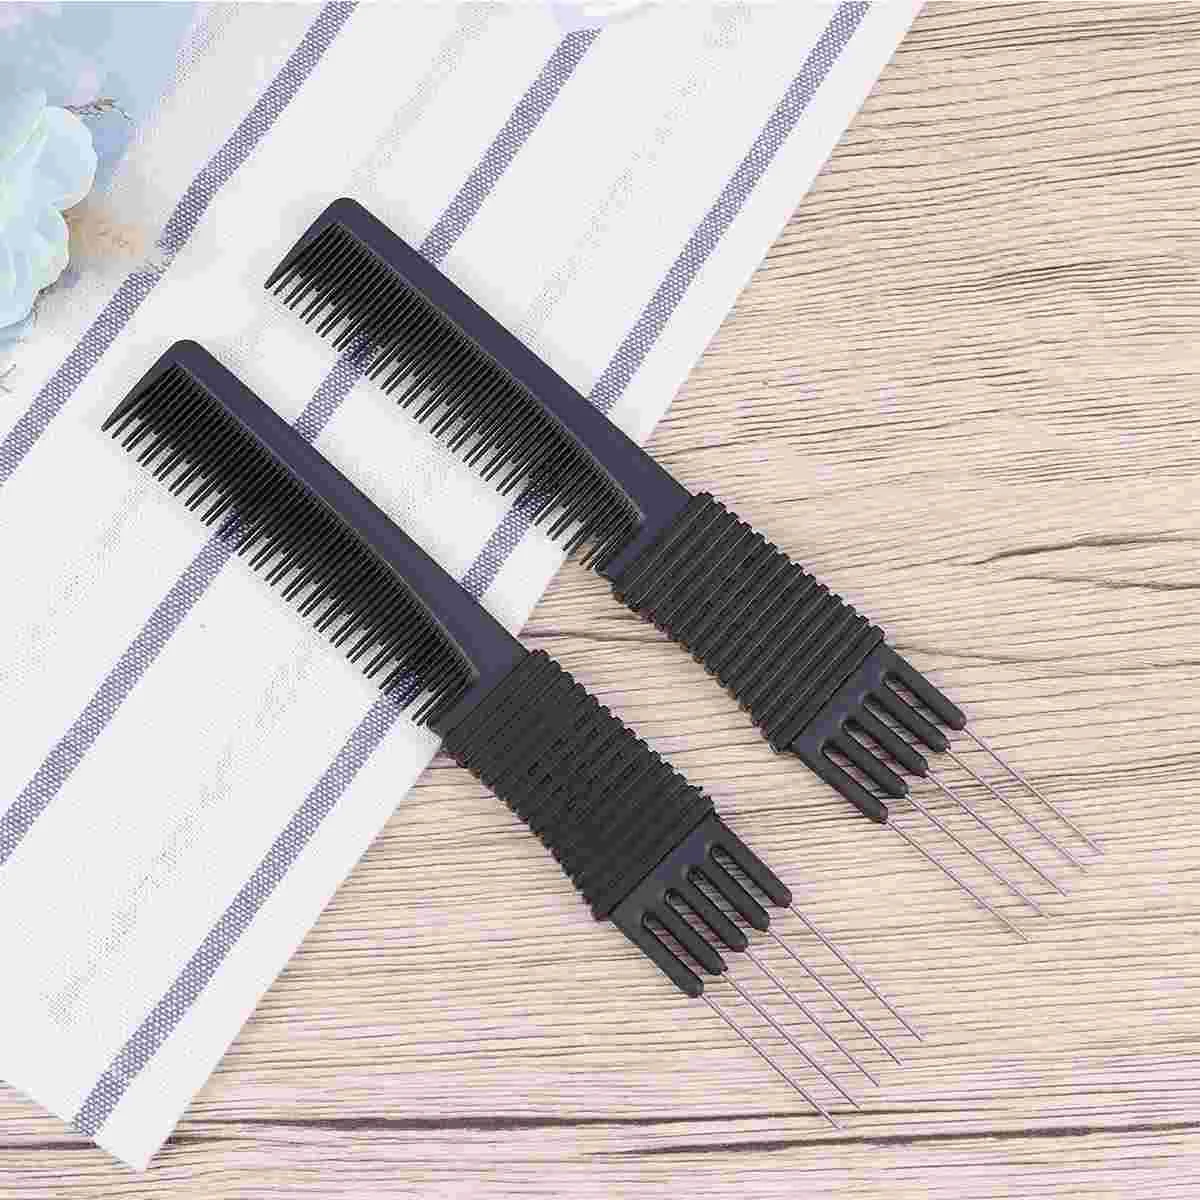 

Comb Hair Combs Teasing Styling Metal Haircut Carbon Salon Tooth Static Prong Anti Lift Tail Professional Lifting Black Tools